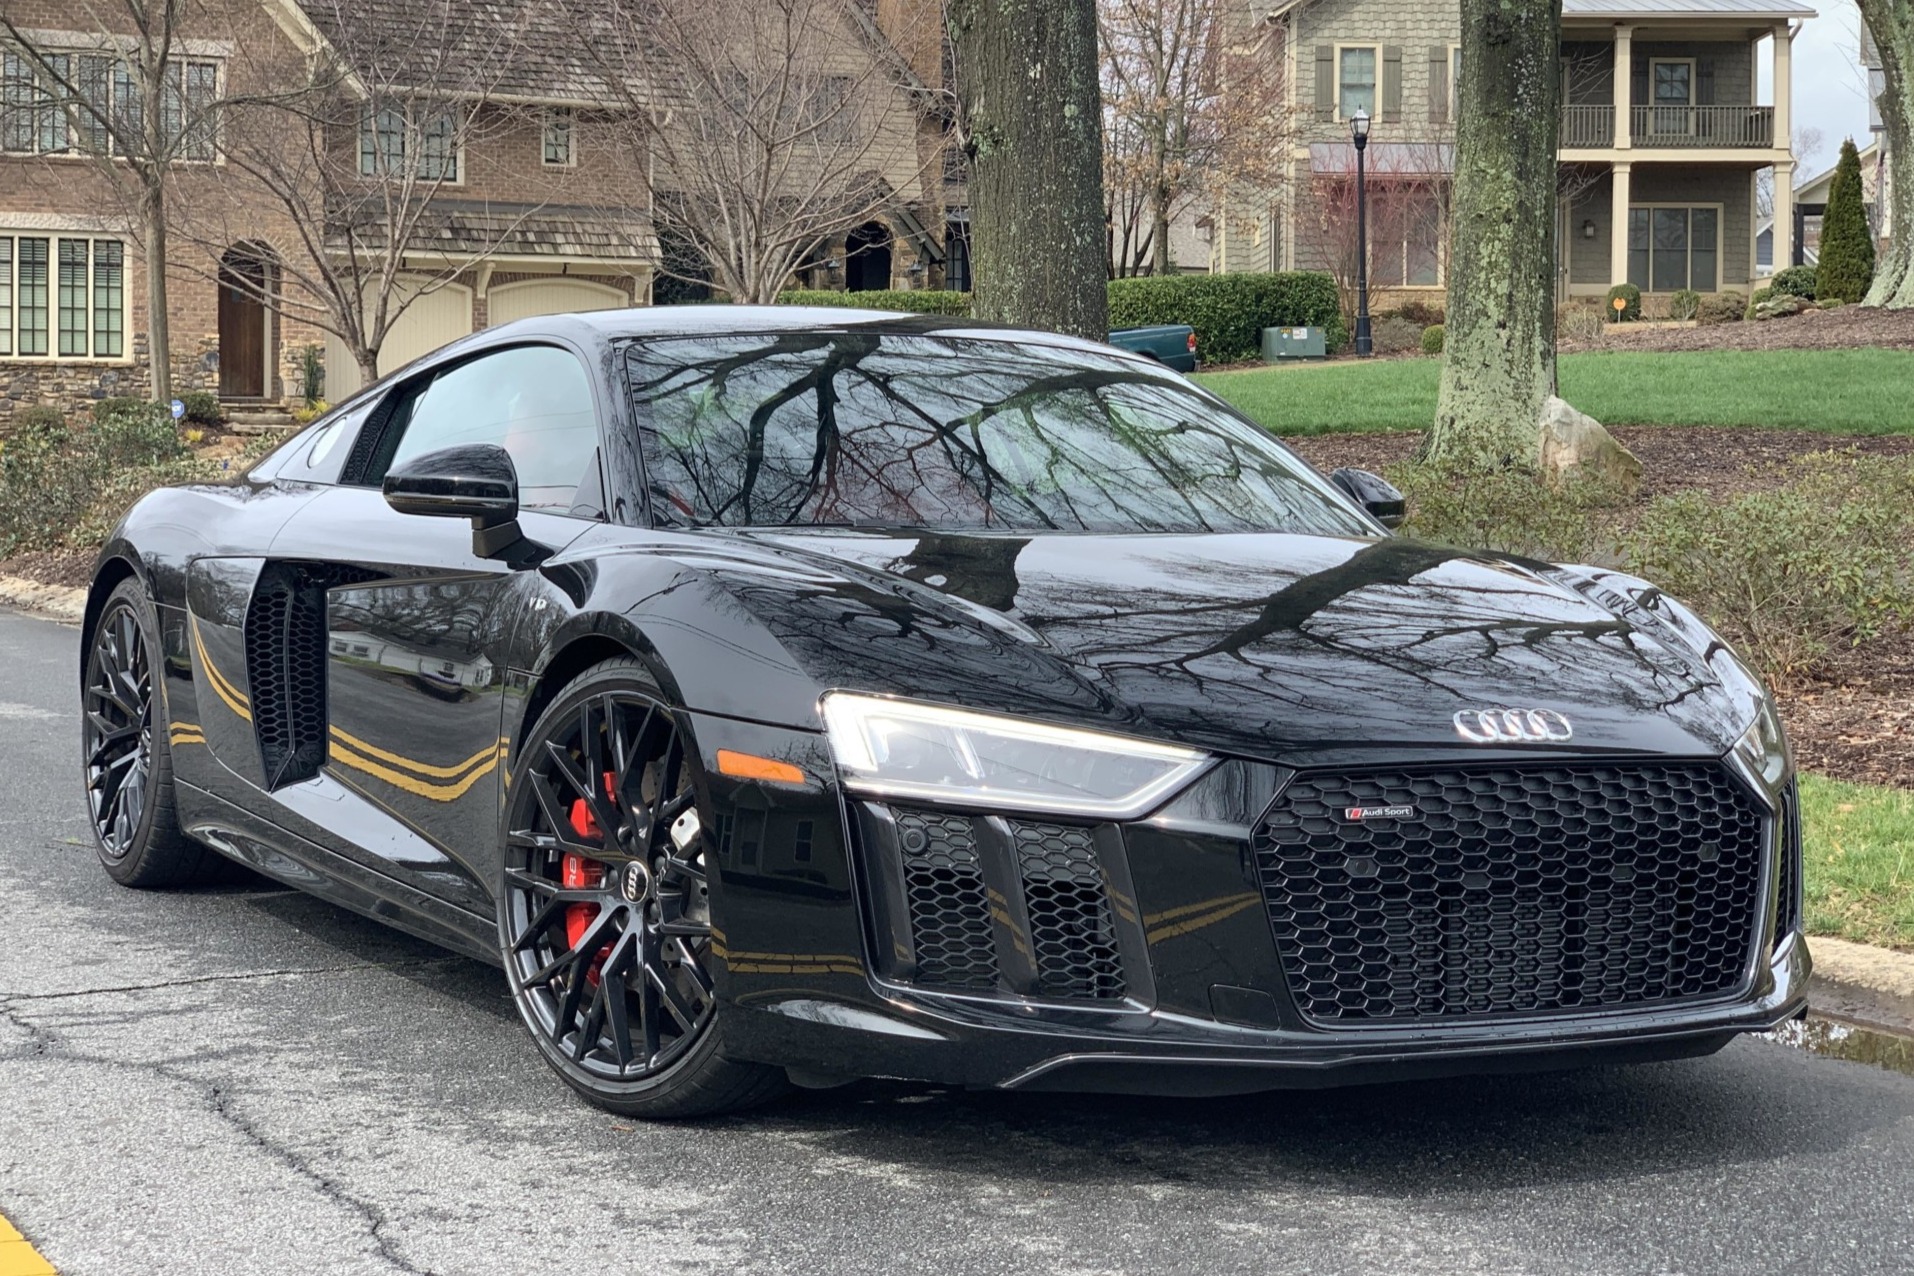 2,900-Mile 2018 Audi R8 V10 Coupe RWS S Tronic for sale on BaT Auctions -  sold for $118,000 on March 4, 2020 (Lot #28,654) | Bring a Trailer